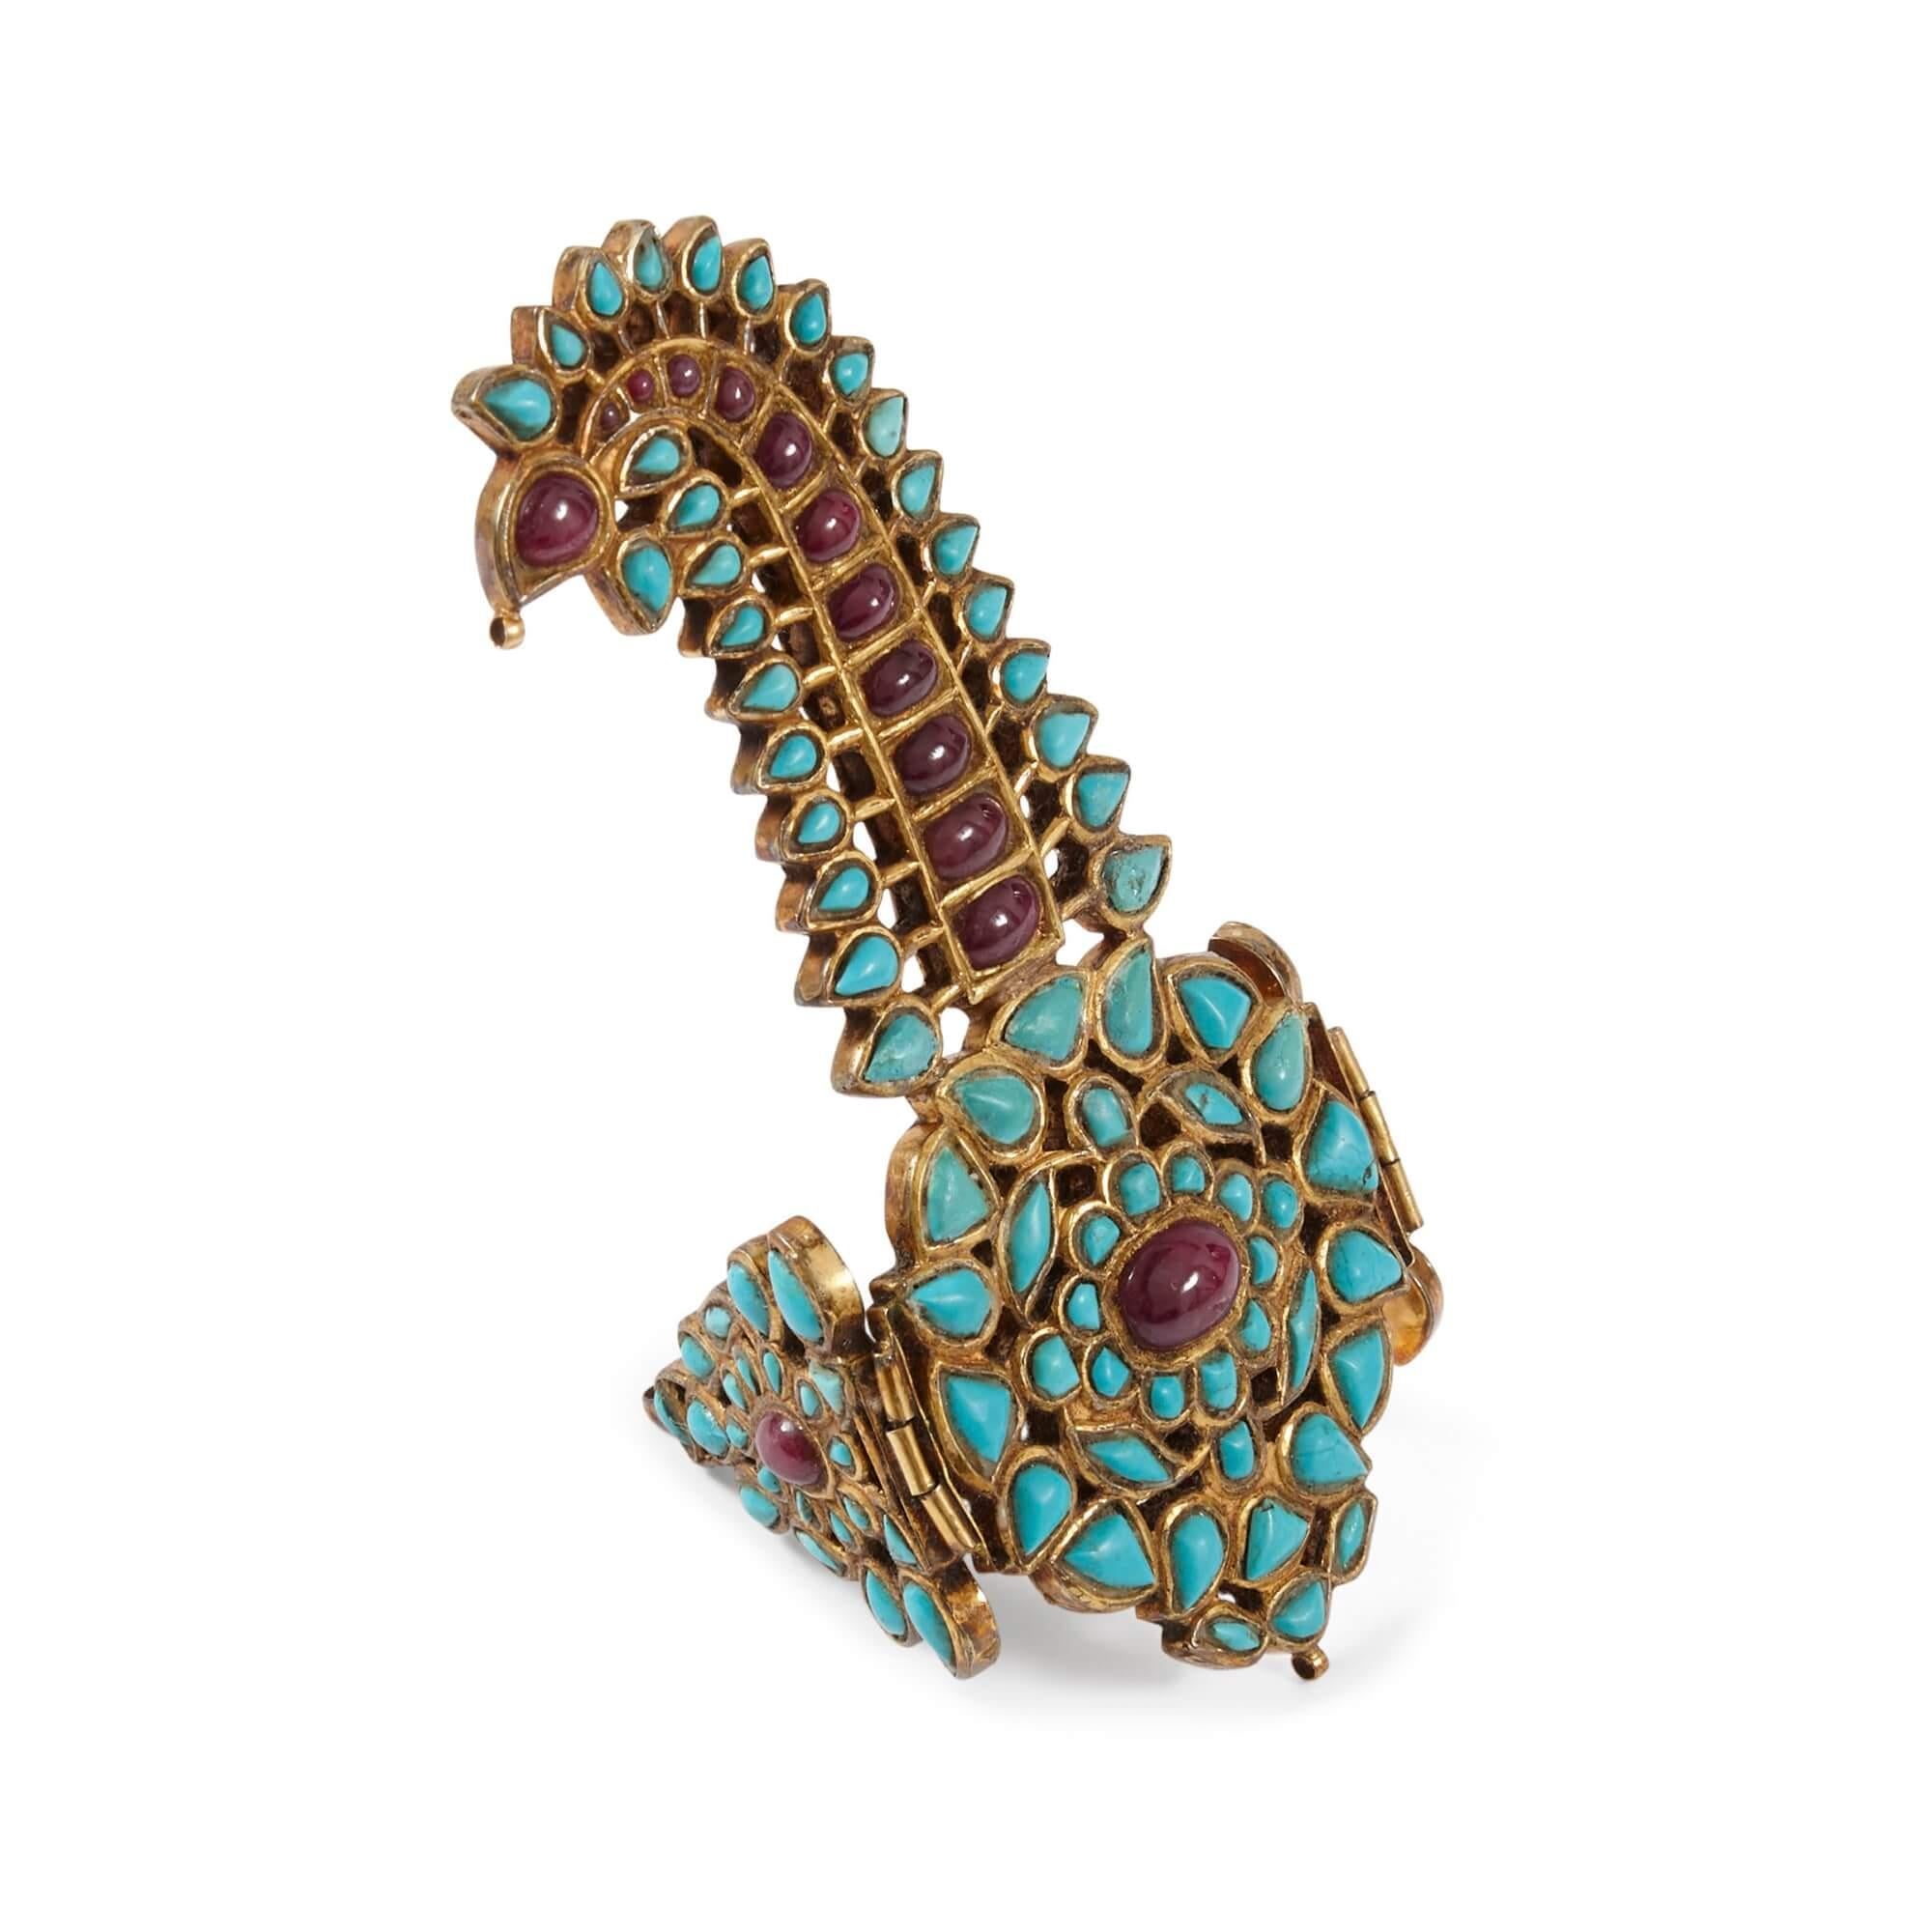 Rare Indian gold, ruby and turquoise Sarpech turban ornament
Indian, 19th Century
Sarpech: height 12cm, width 14cm, depth 0.5cm
Case: height 19cm, width 20cm, depth 4cm

Similar to works in the Royal Collection, this beautiful ornament is a